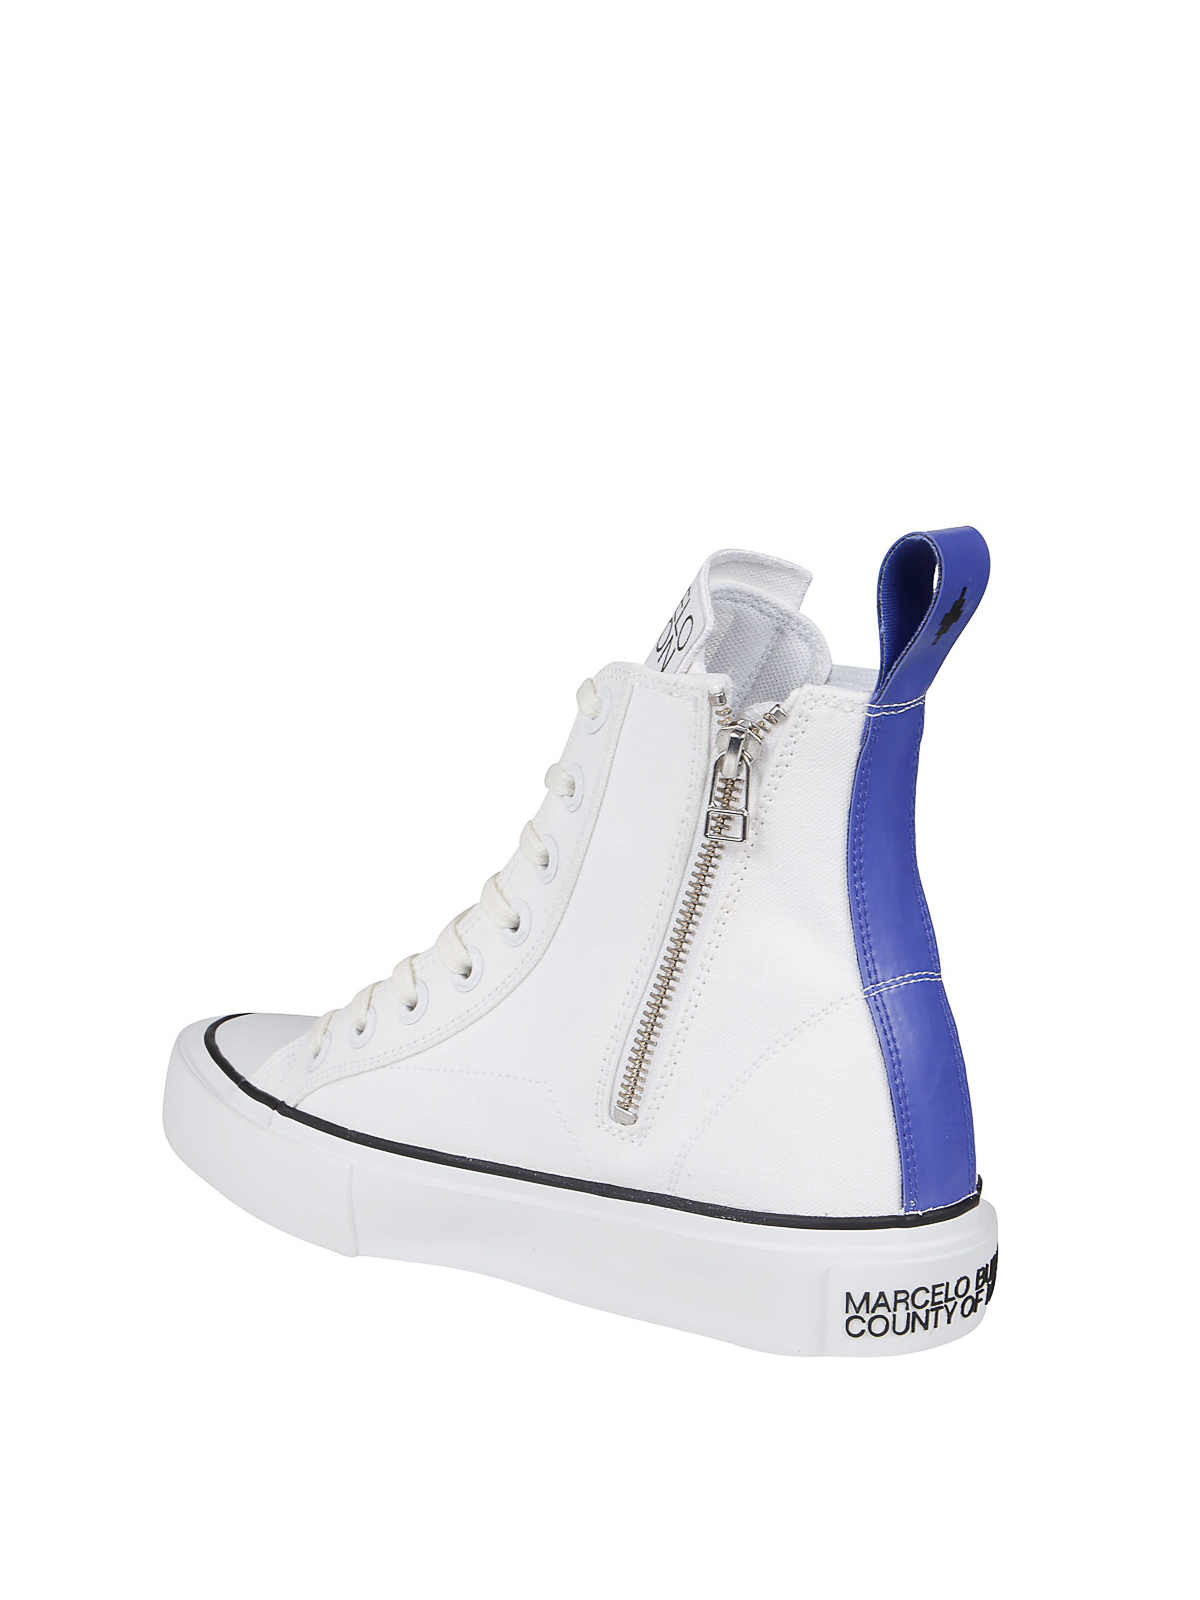 Trainers Marcelo County Of Milan - Wings cotton high-top shoes -